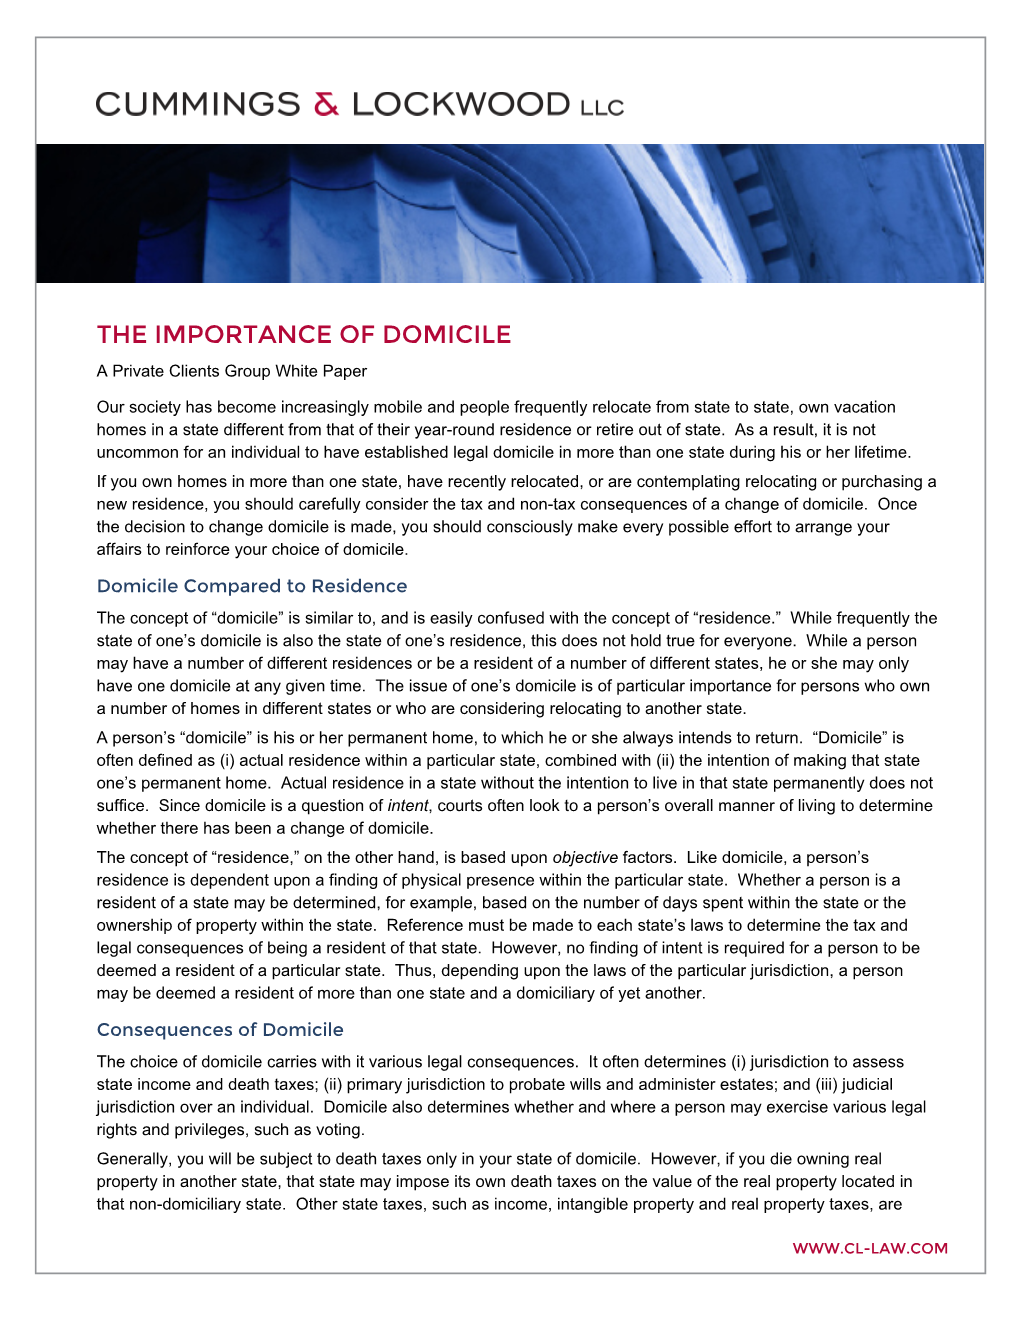 THE IMPORTANCE of DOMICILE a Private Clients Group White Paper